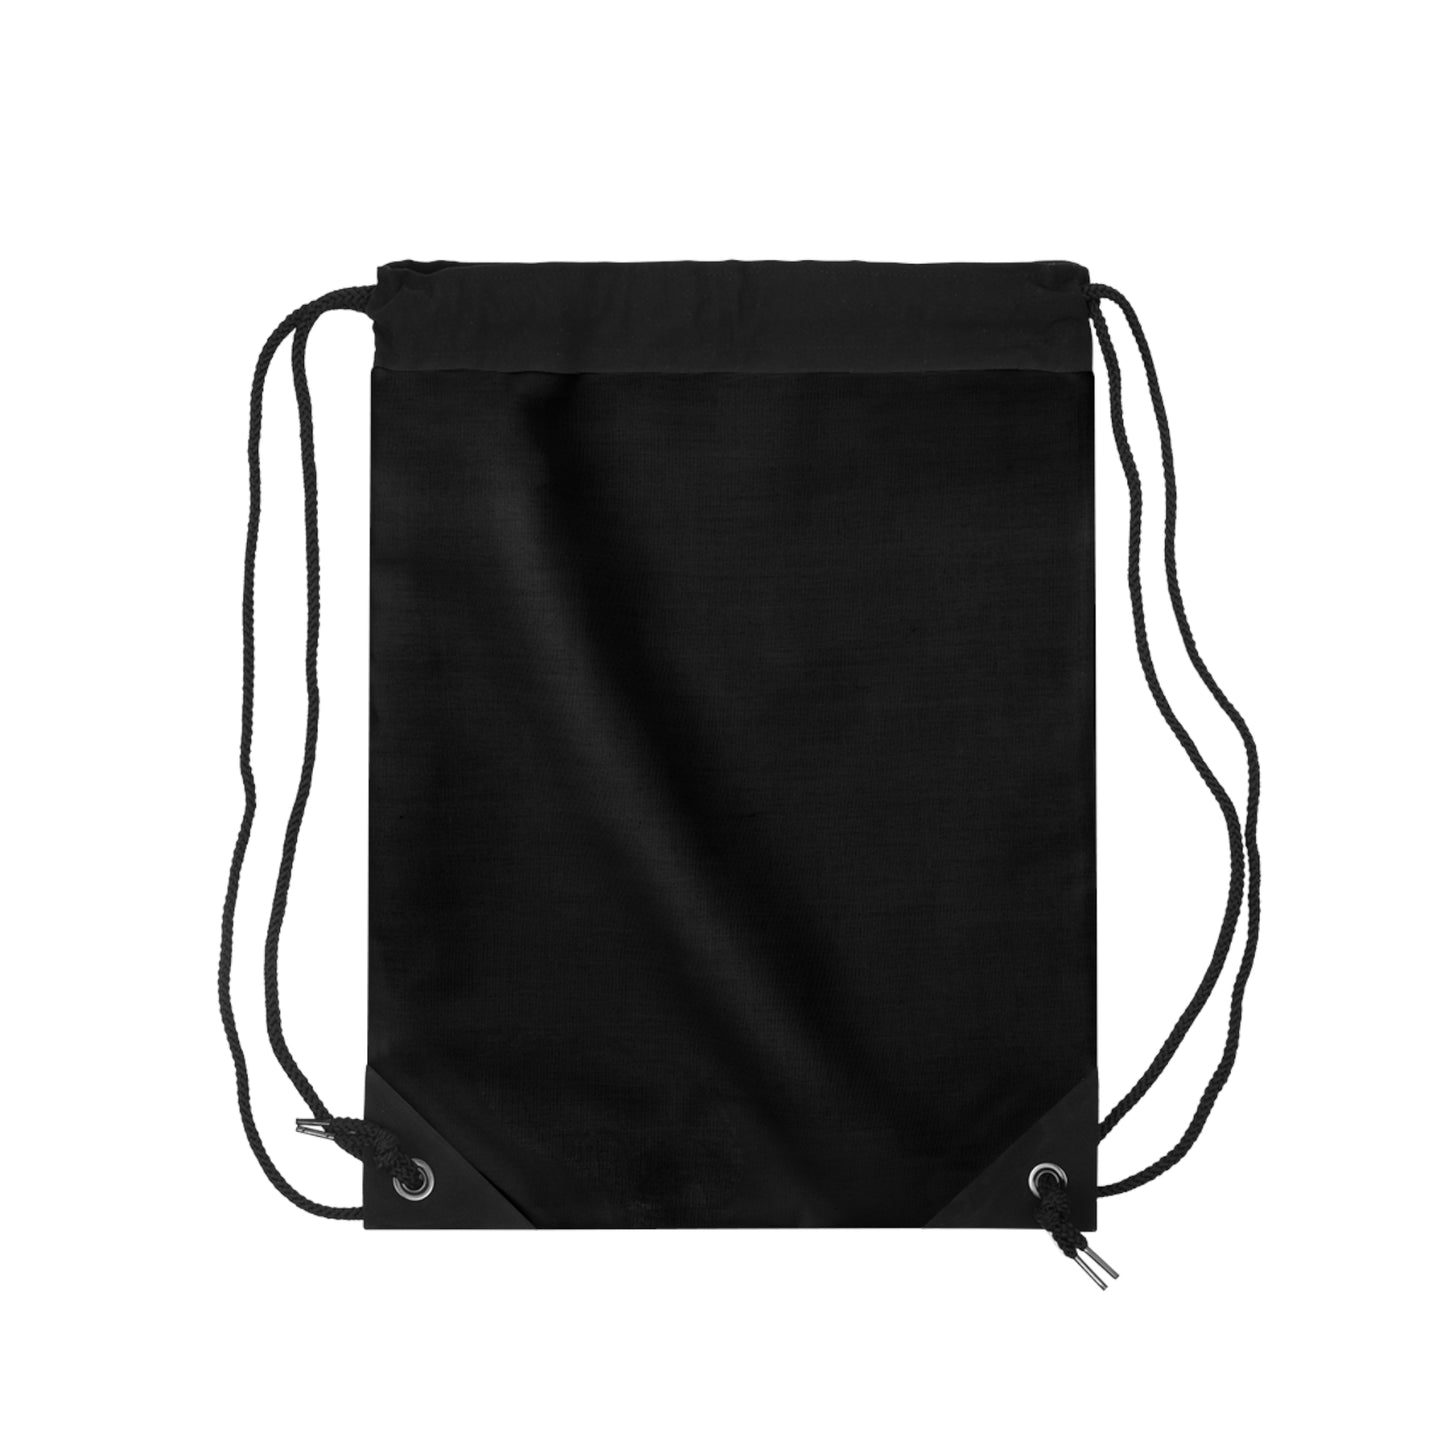 God Before Me No One & Nothing Can Stop Me Drawstring Bag